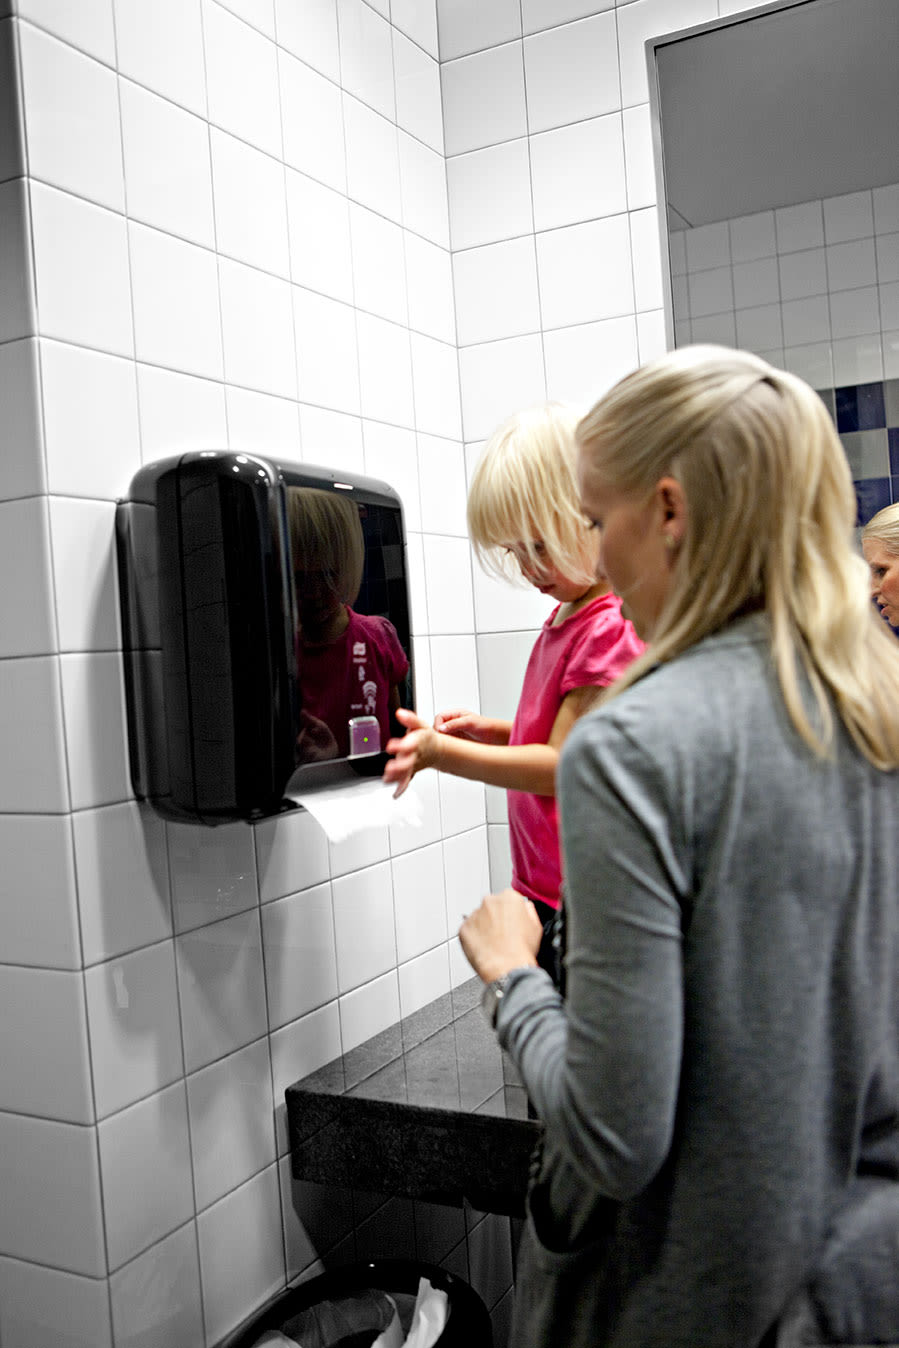 This Automatic Paper Towel Dispenser Helps Make Your Paper Towels